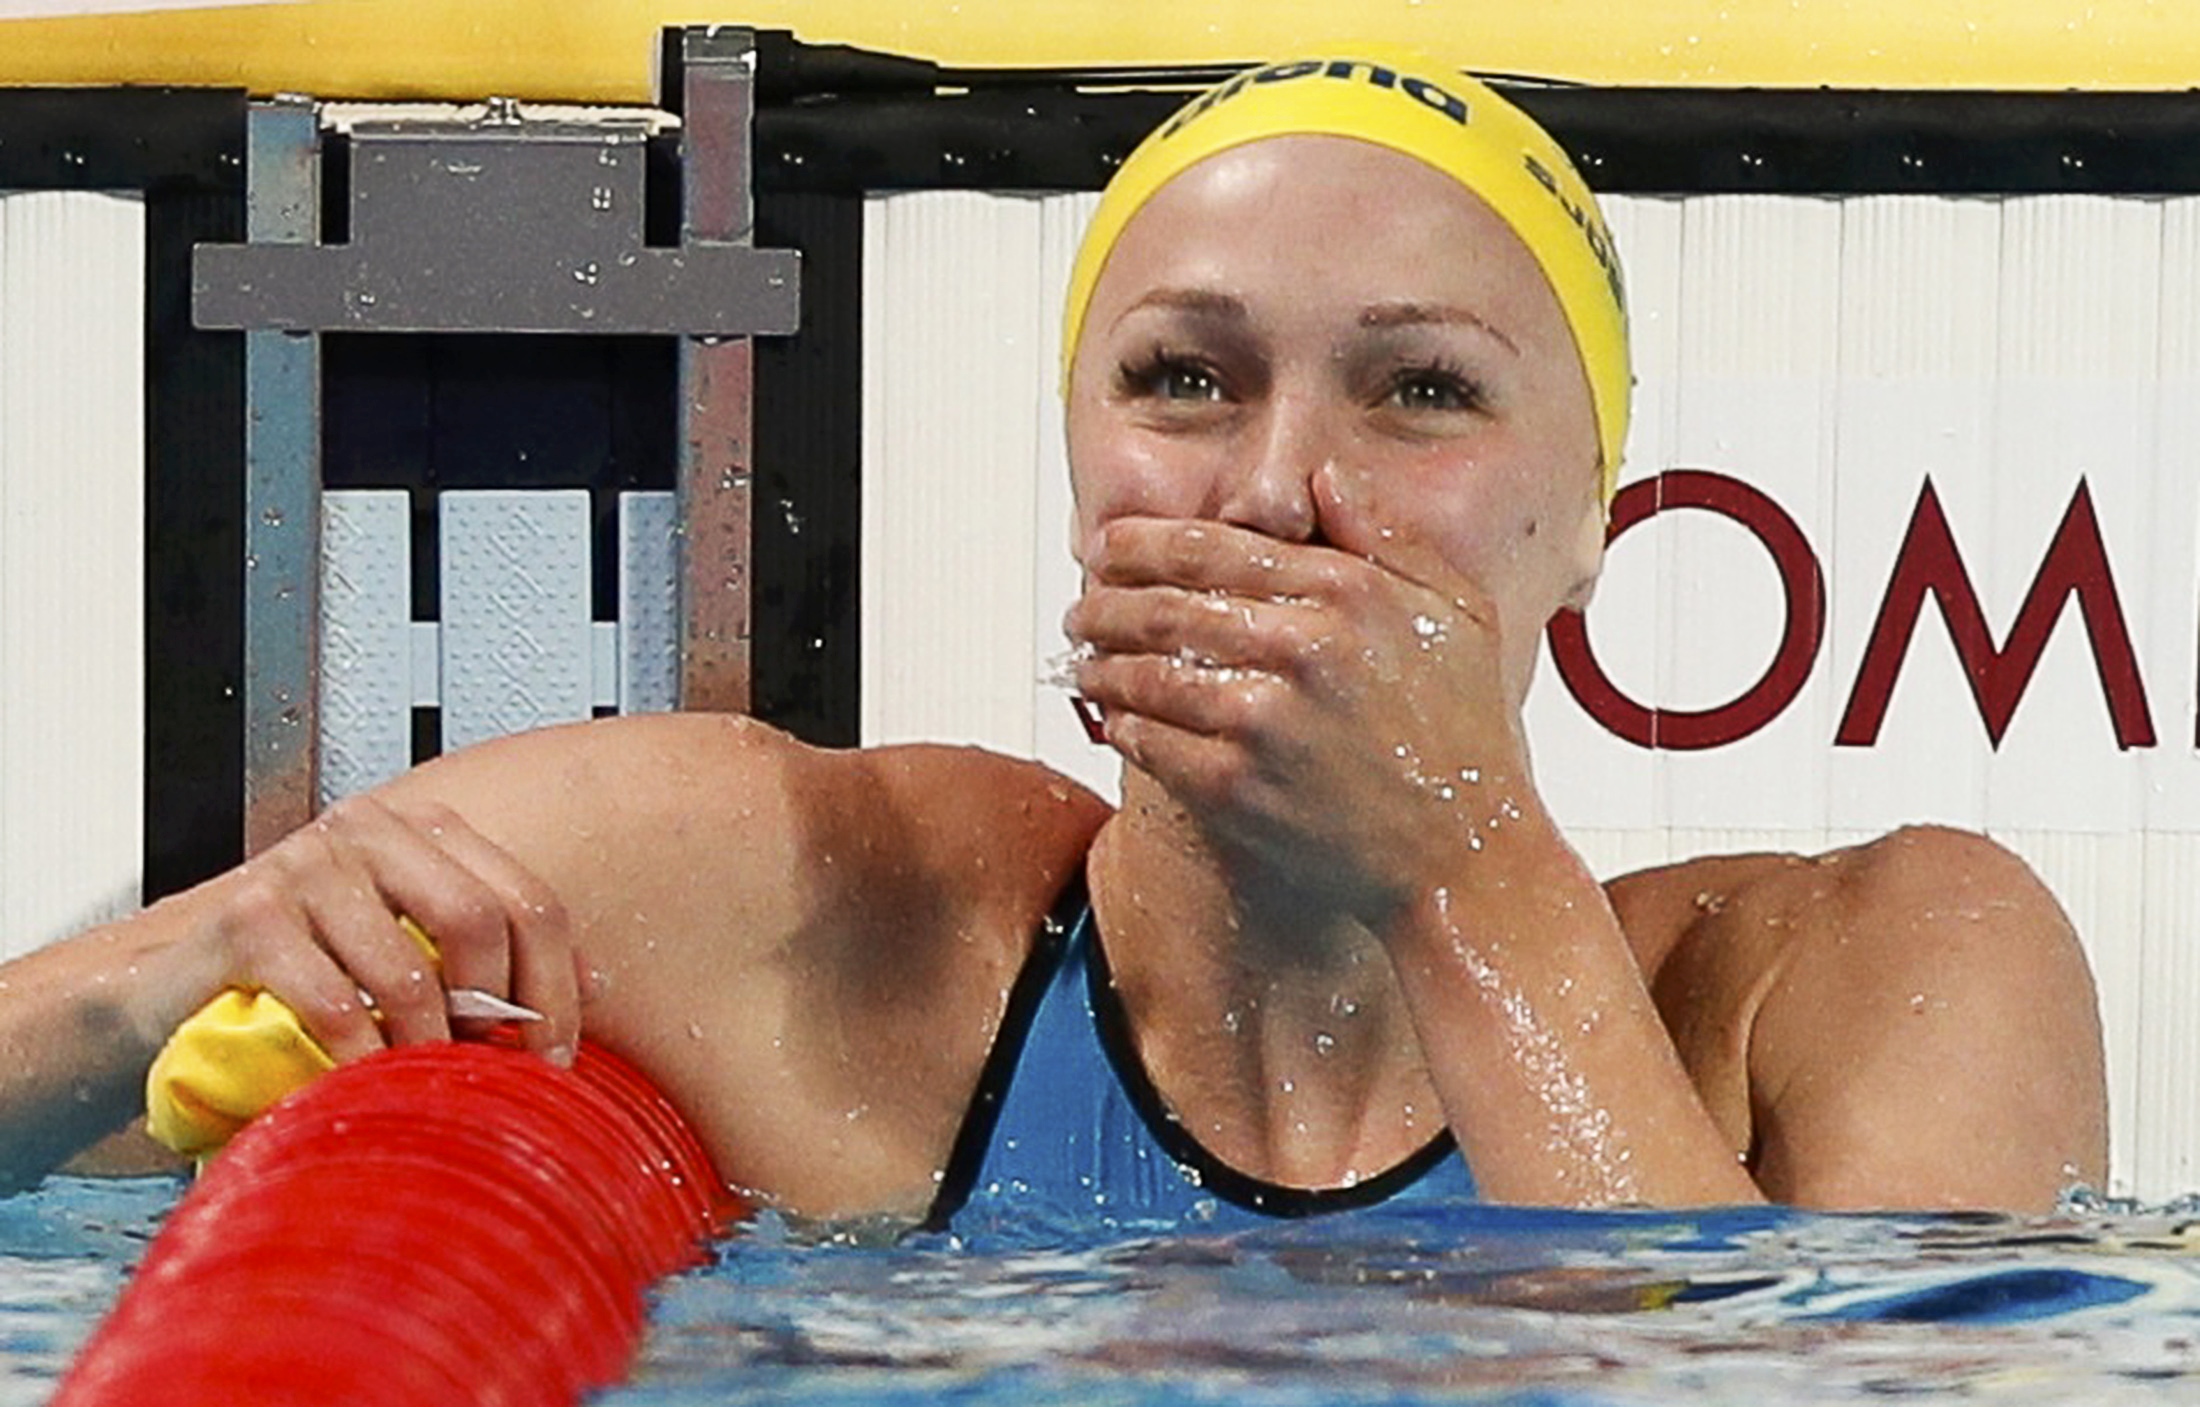 Sarah Sjostrom of Sweden reacts after setting a new world record in women's 100m butterfly final. Photo: Reuters